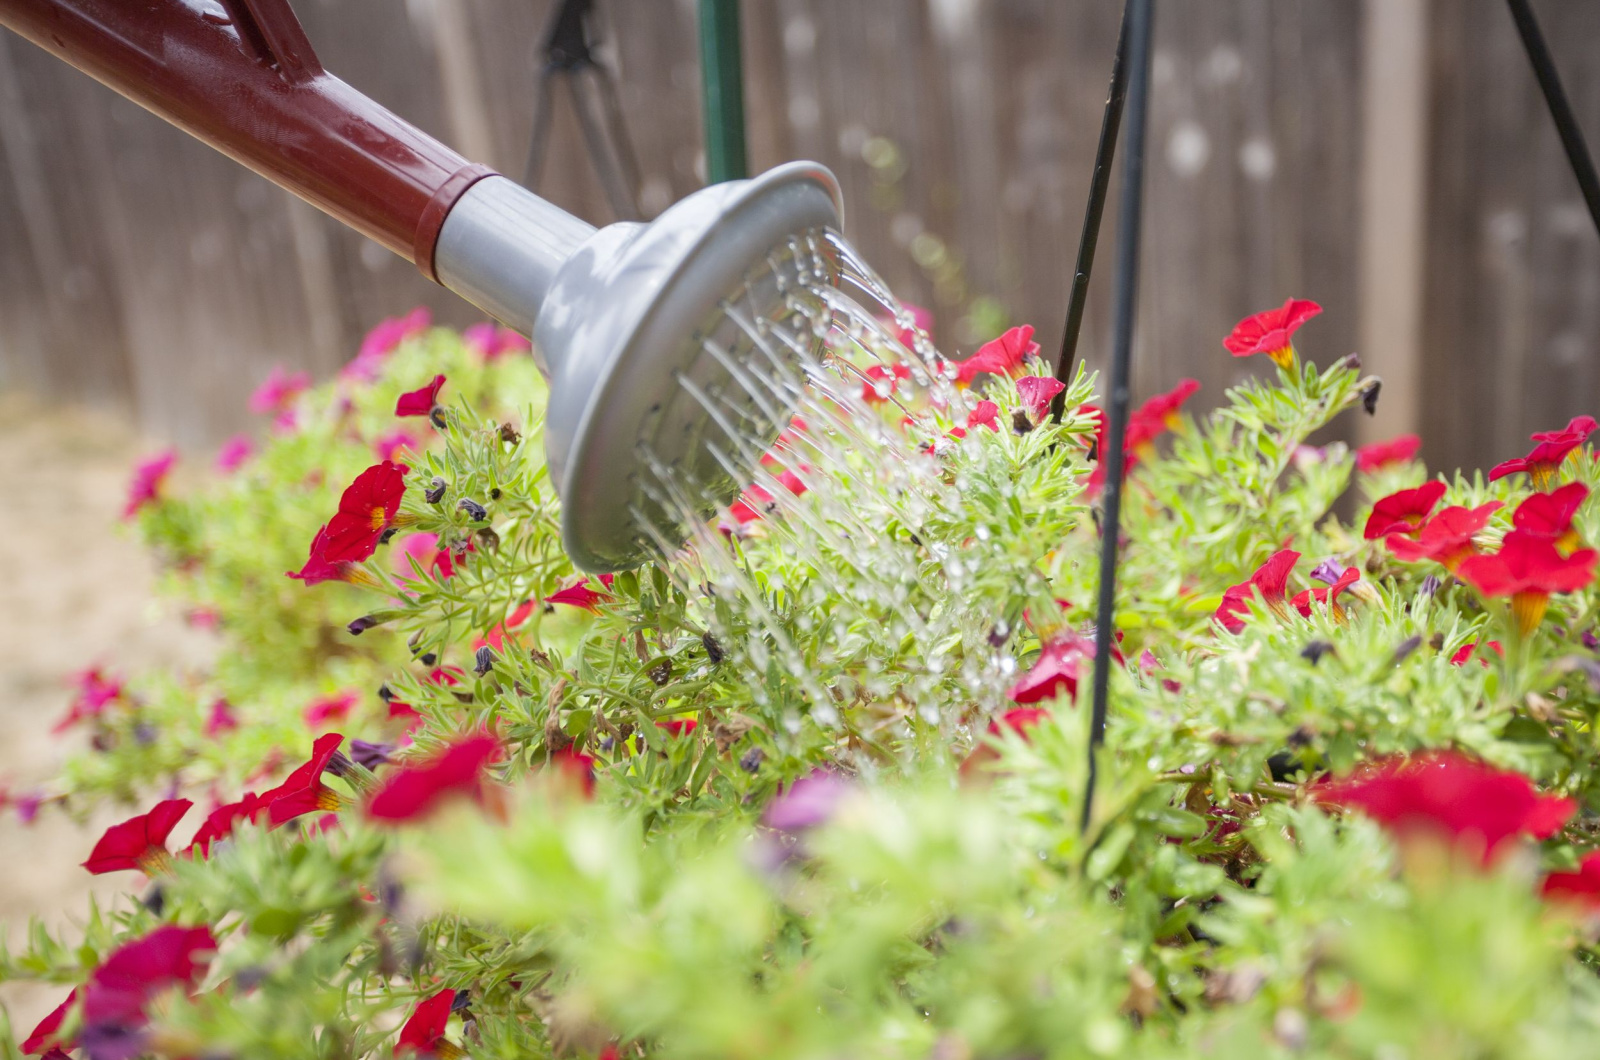 Using a red watering can to water flowers